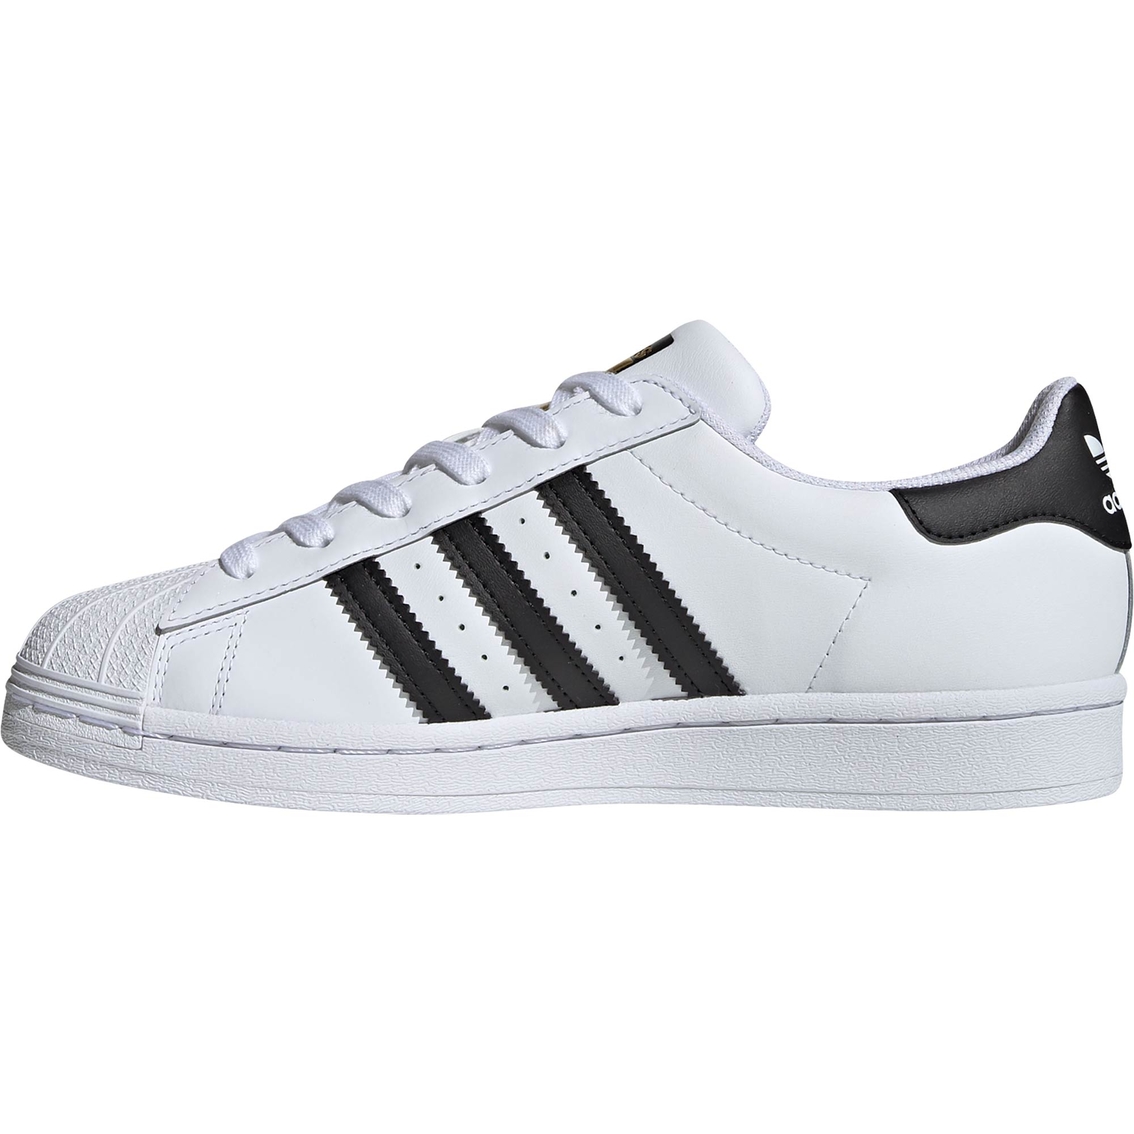 Adidas Women's Superstar Shoes - Image 3 of 5